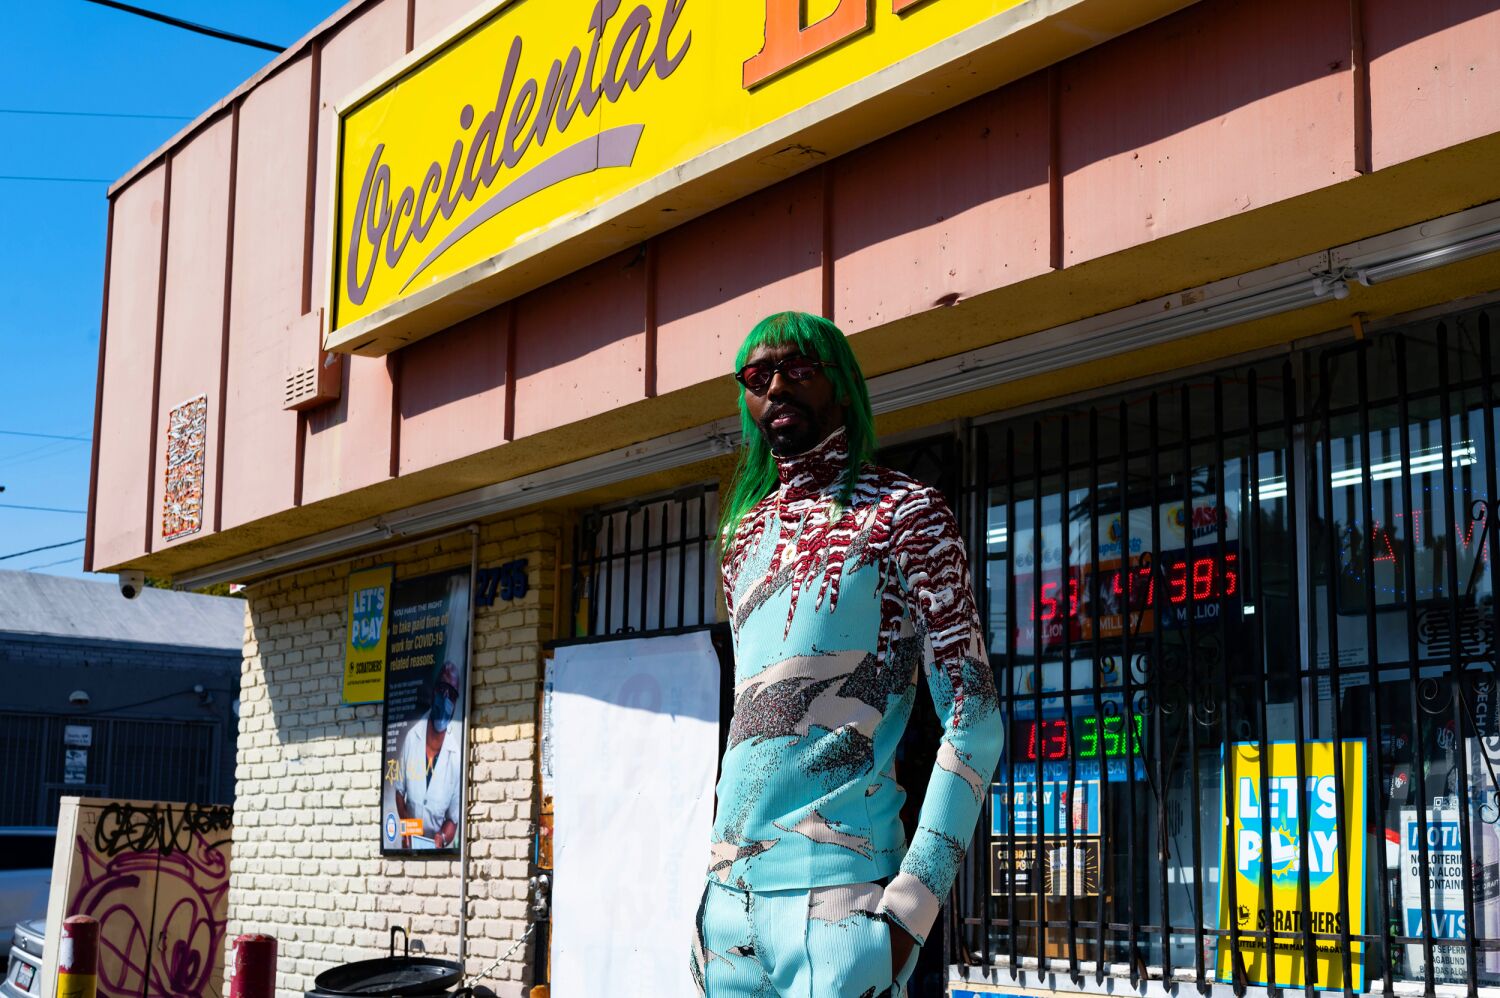 The strip mall is L.A.'s high-fashion hangout. Pull up with purpose and stay awhile